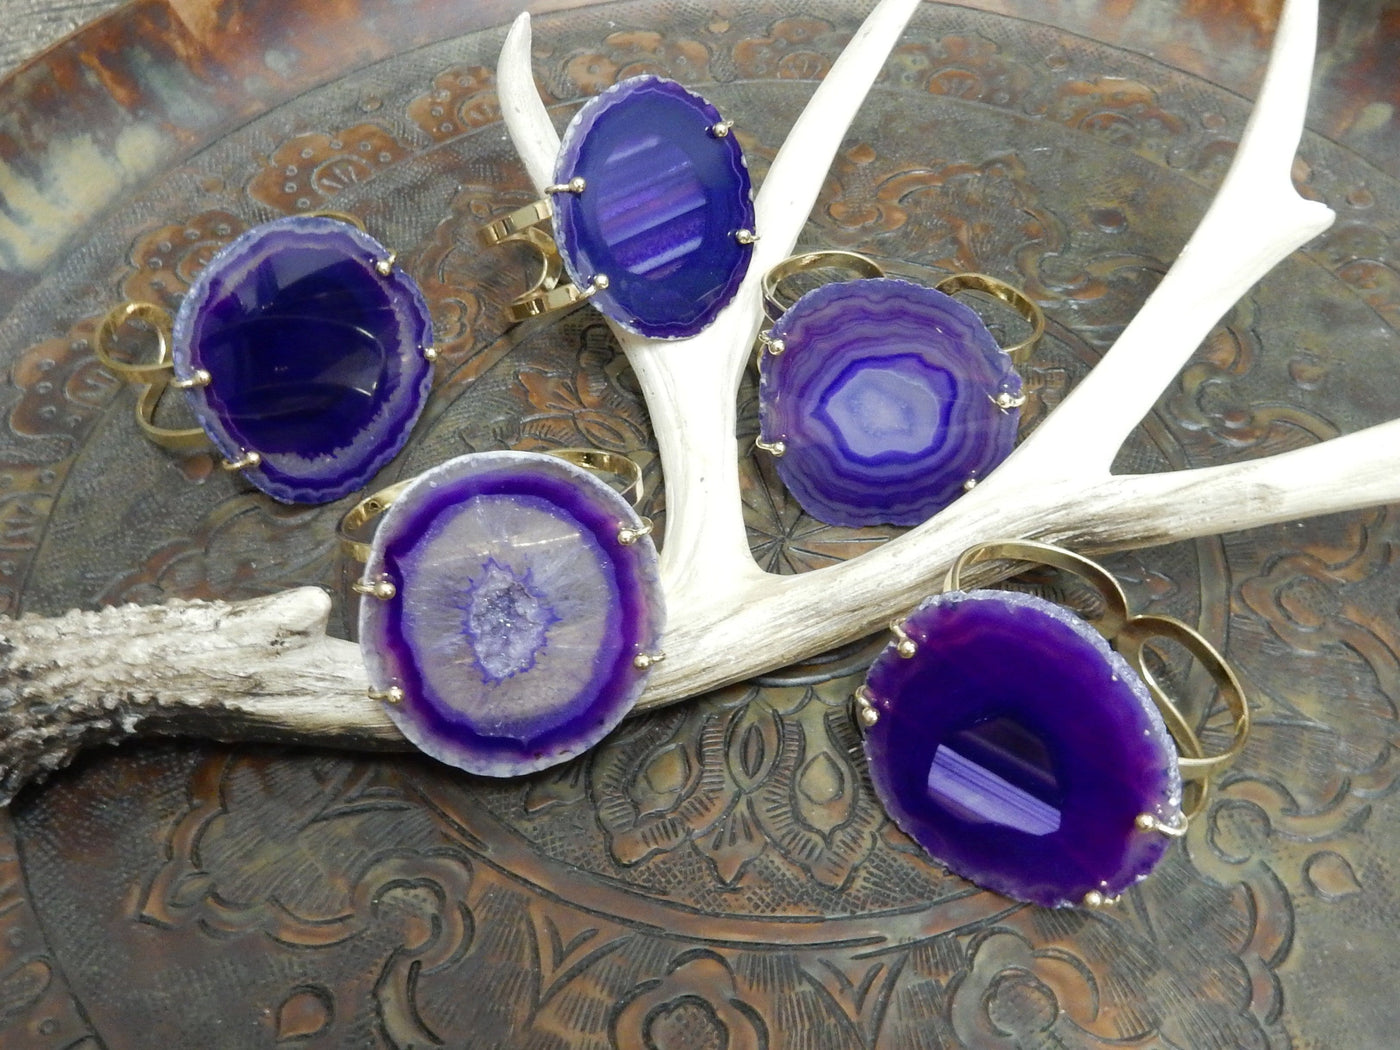 Purple Agate Slice on Electroplated 24k Gold Adjustable Bracelets are front facing to show variation in agate pattern.